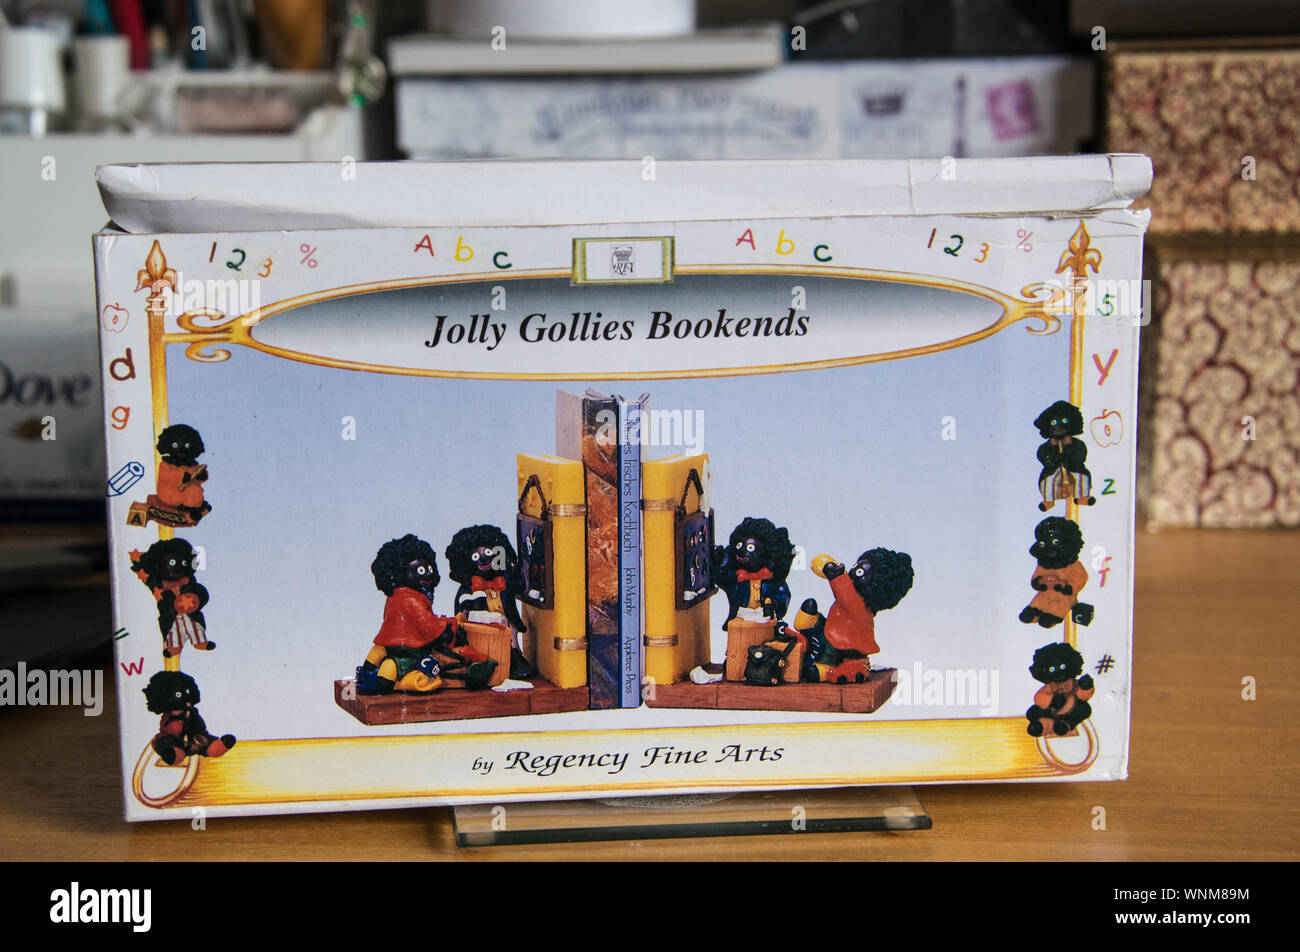 Jolly Gollies bookends box. Stock Photo